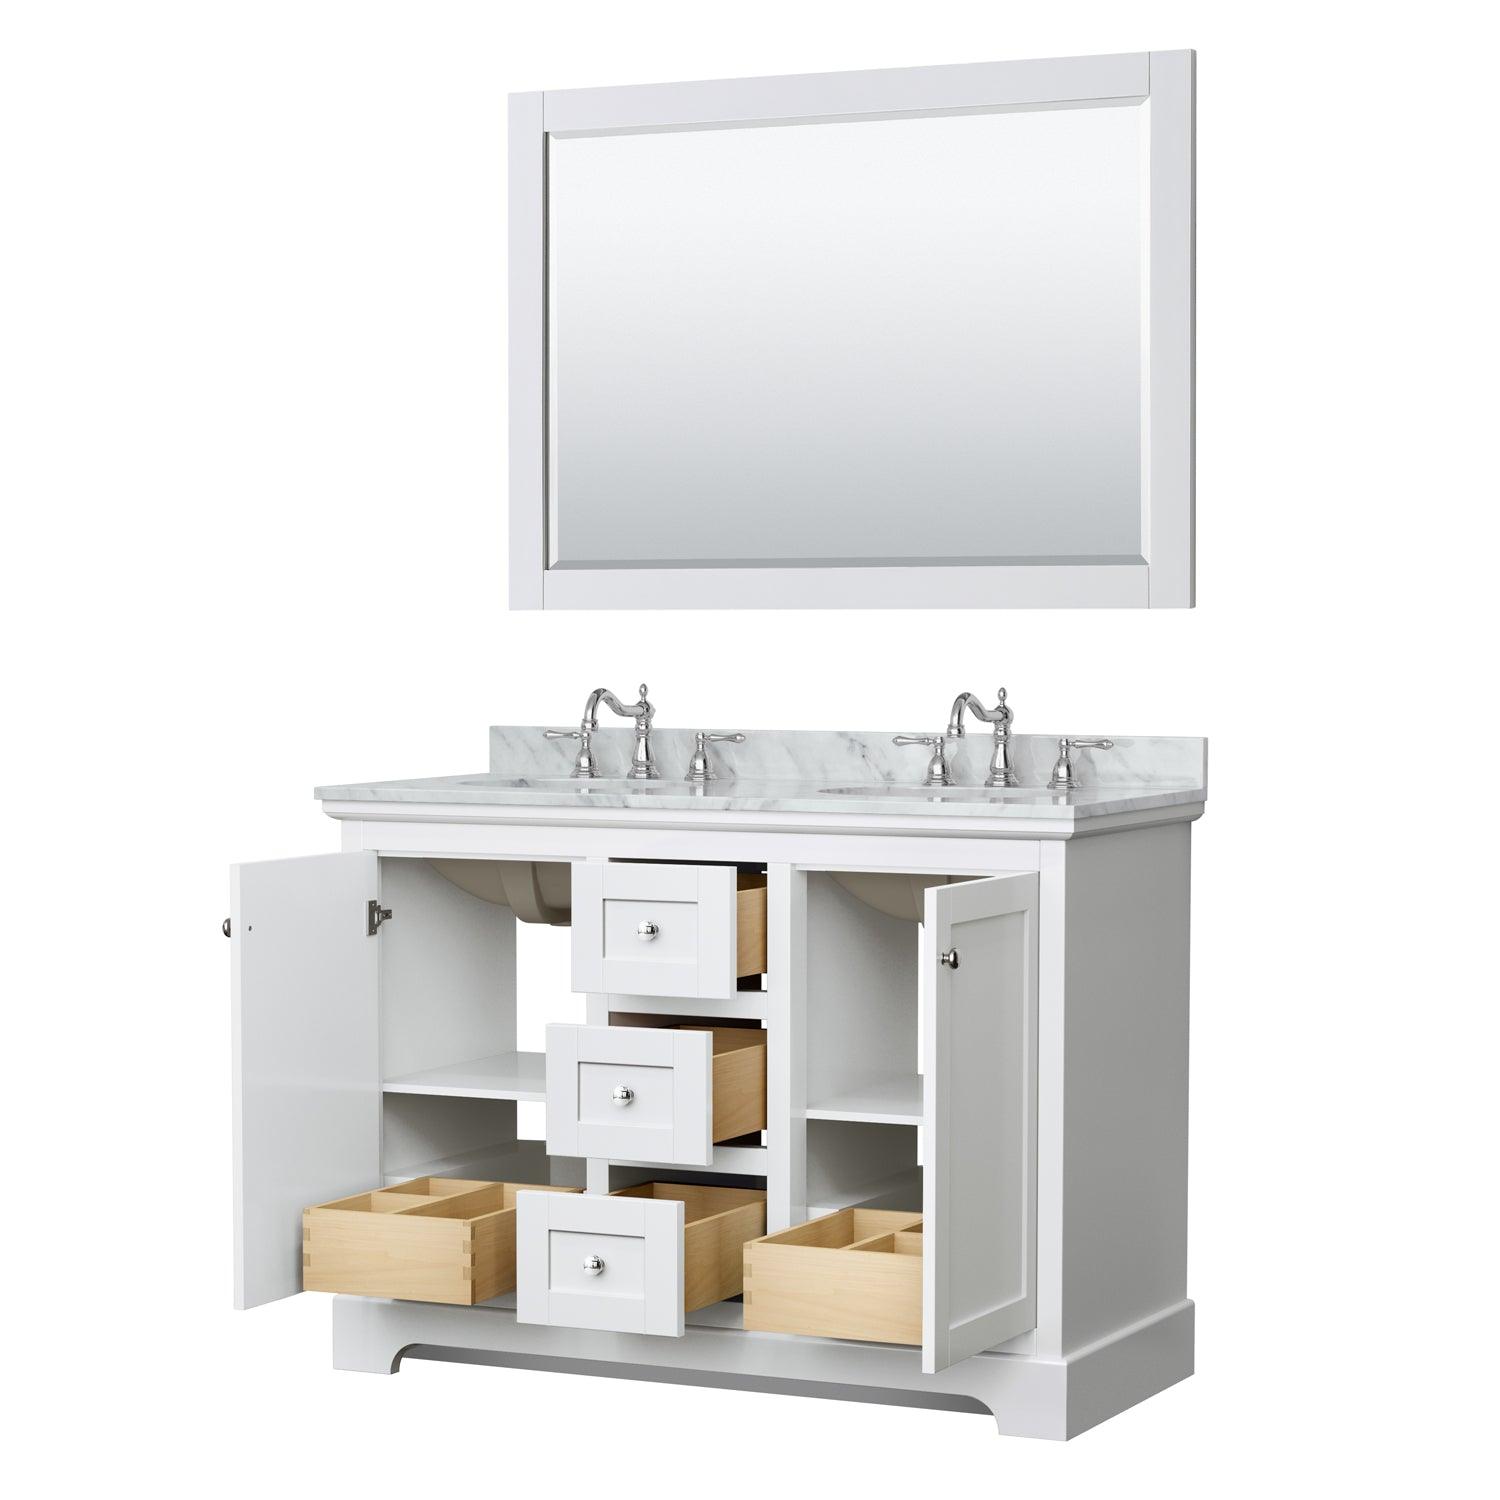 Wyndham Collection Avery Double Bathroom Vanity with White Carrara Marble Countertop, Undermount Oval Sinks, Optional Mirror - Sea & Stone Bath